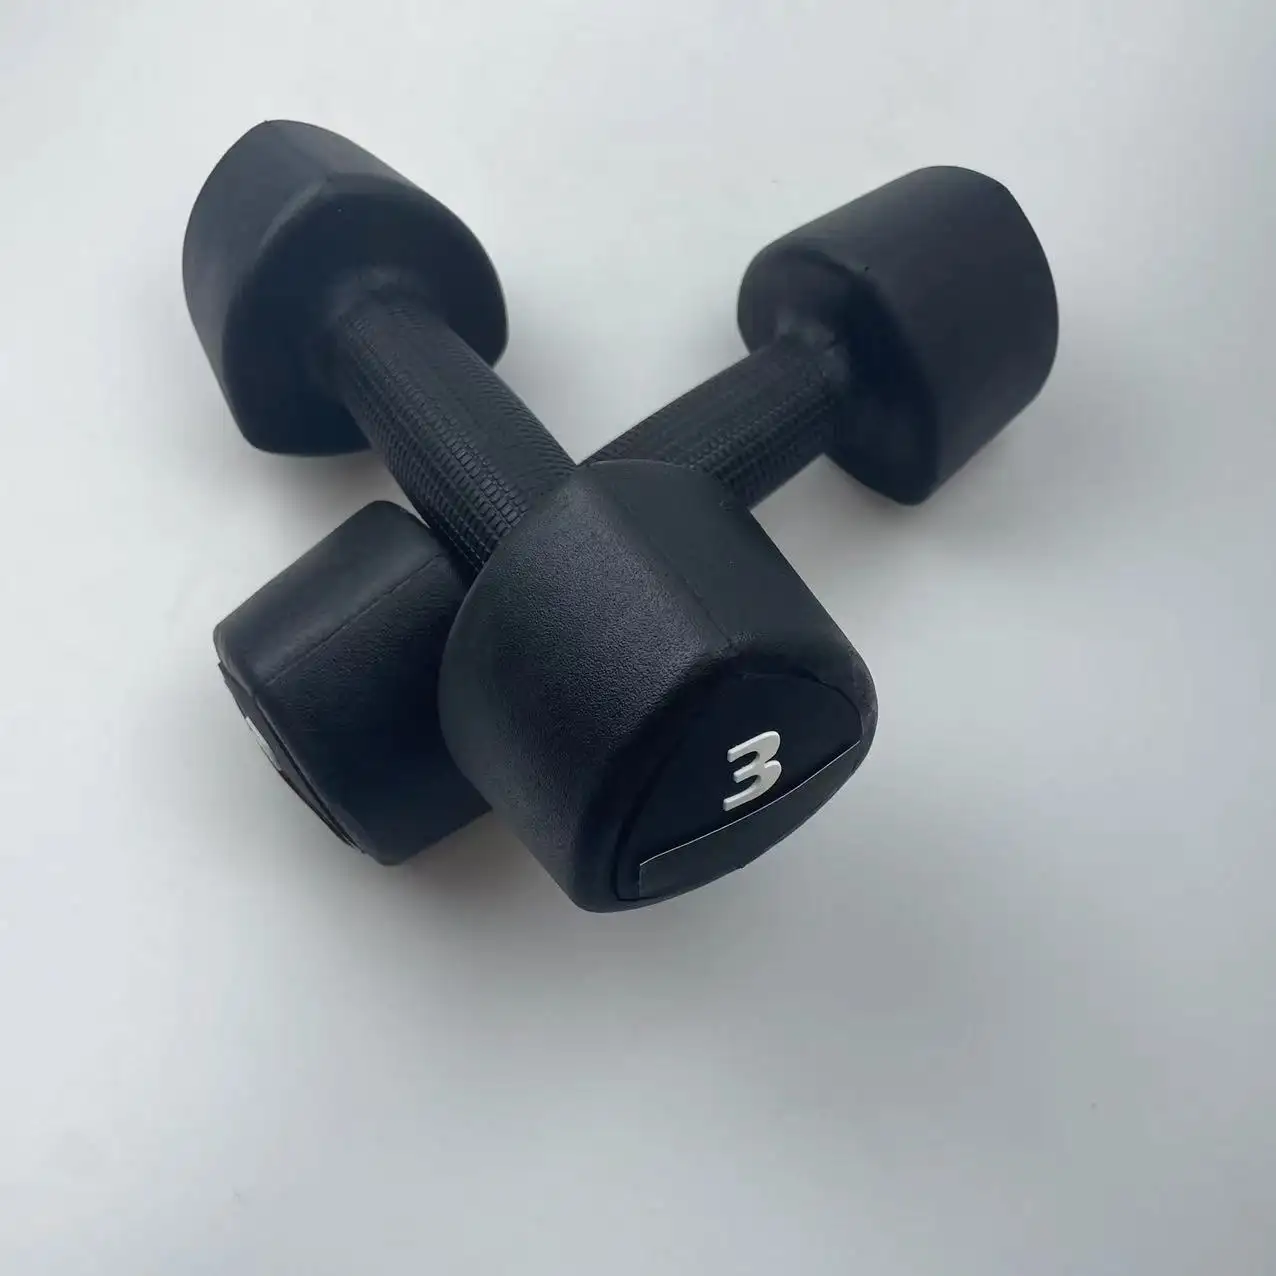 Black Triangle Rubber Dumbbell Triangle Small Weights Dumbbells